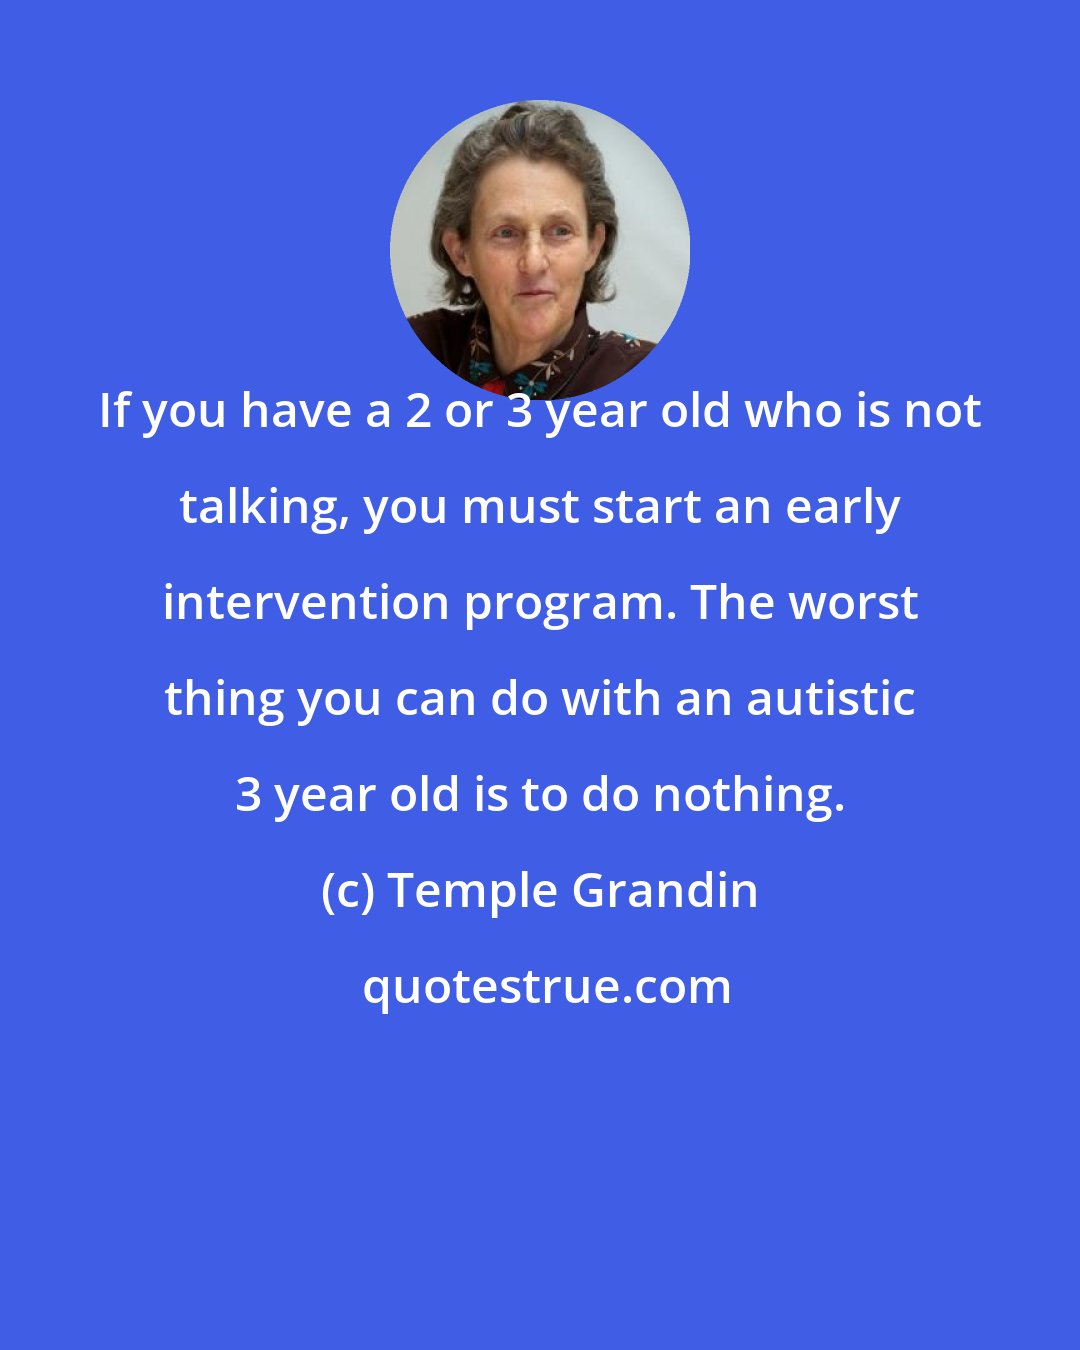 Temple Grandin: If you have a 2 or 3 year old who is not talking, you must start an early intervention program. The worst thing you can do with an autistic 3 year old is to do nothing.